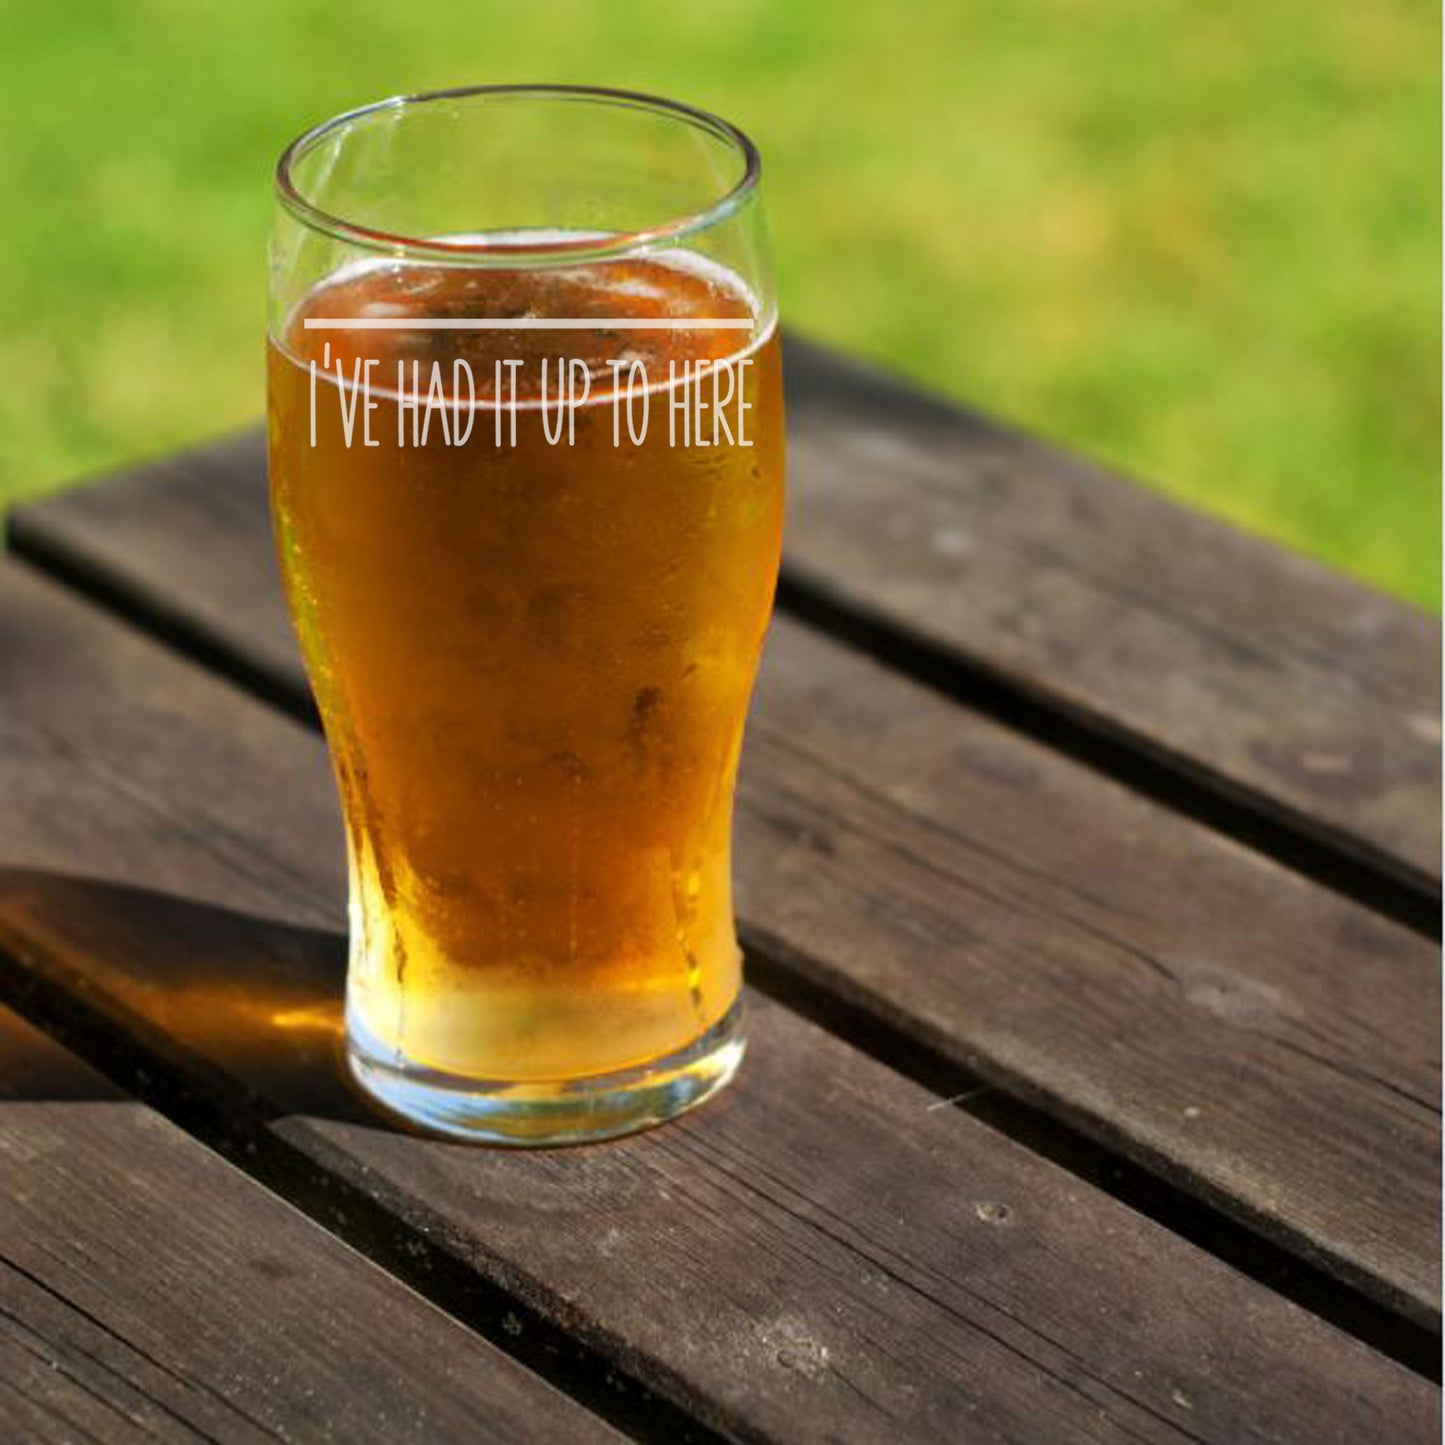 I've Had It Up To Here Engraved Beer Pint Glass  - Always Looking Good -   